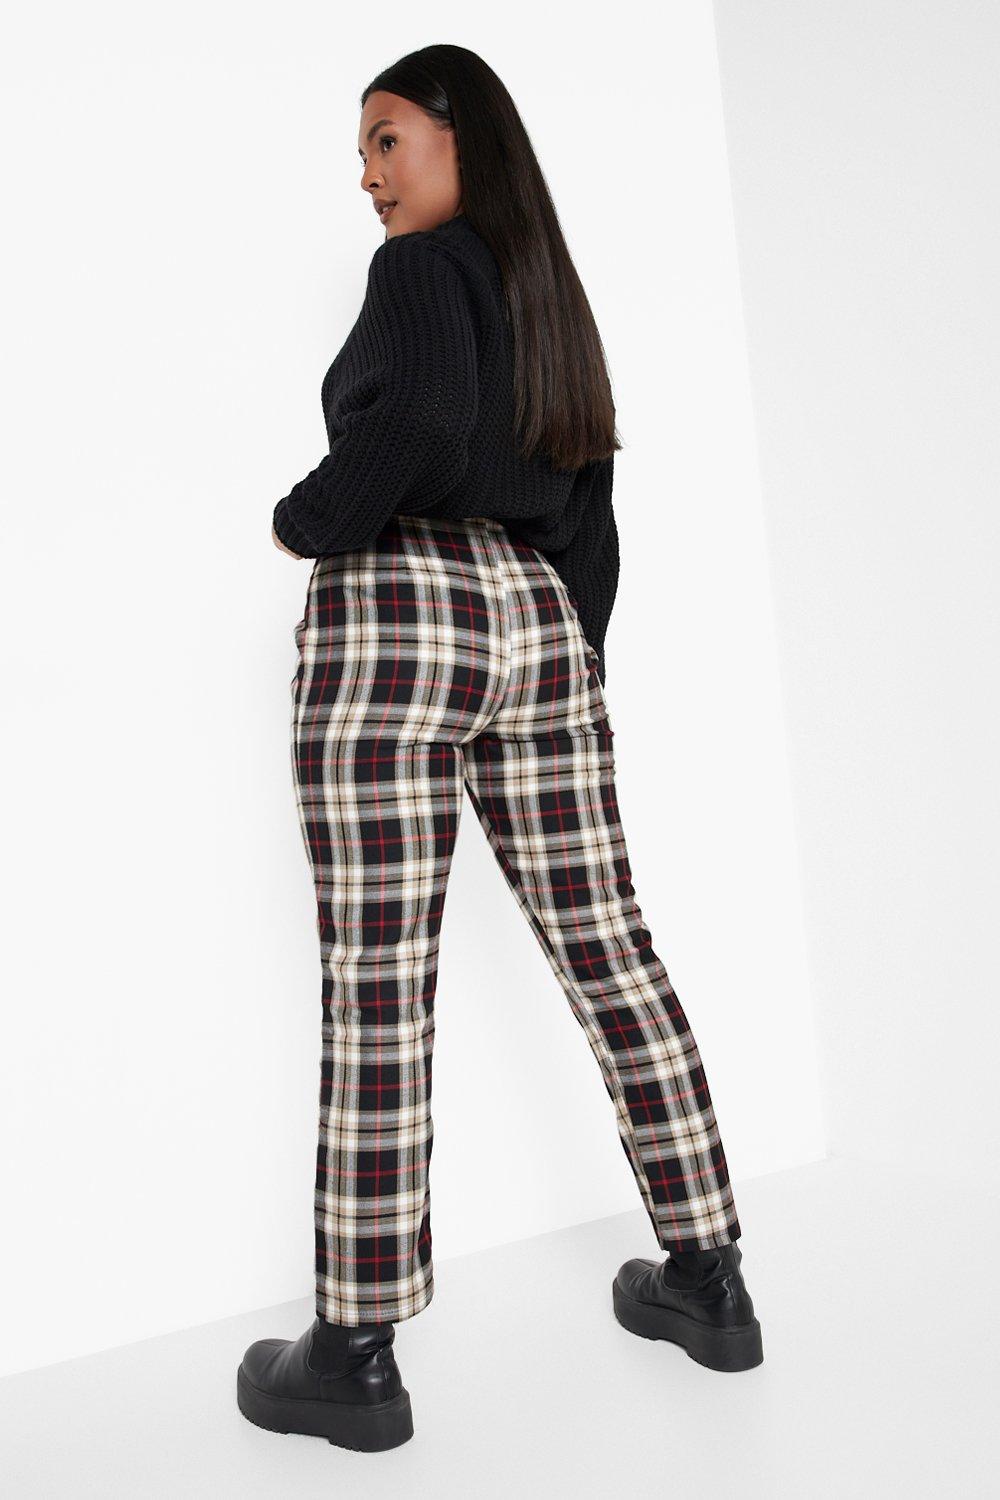 Plaid Check Tapered Pants